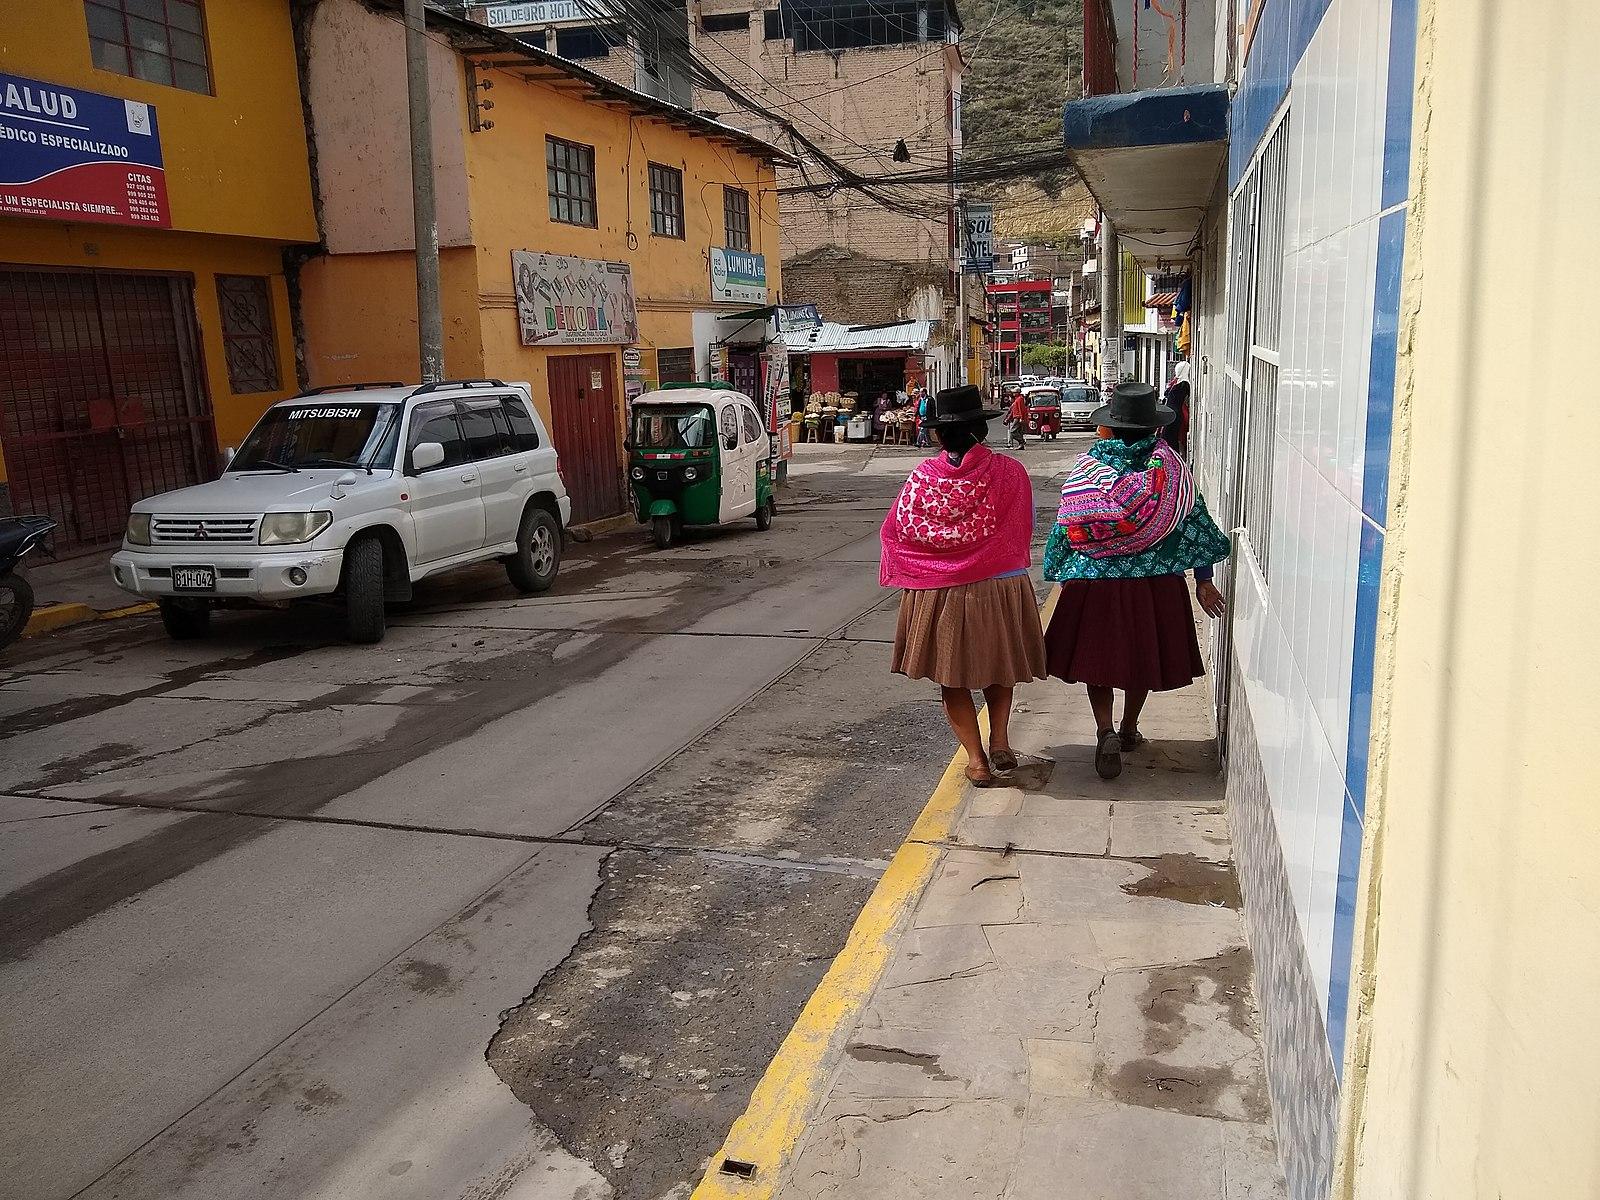 Two people walking down a street wearing brightly colored woven traditional clothing.